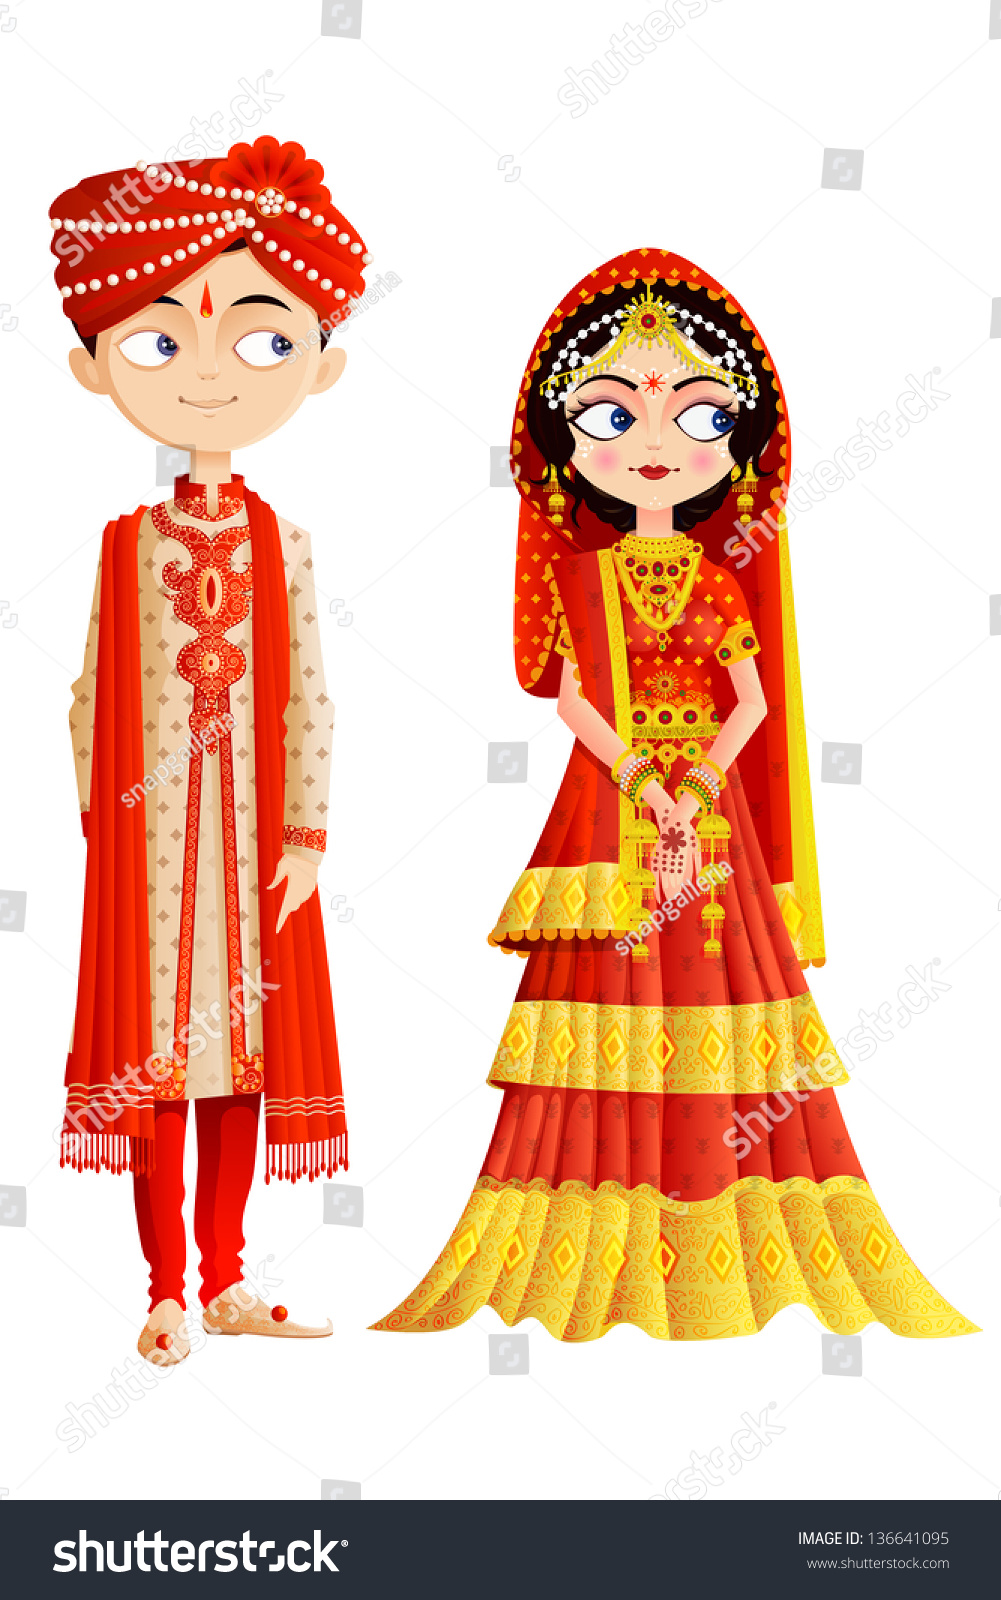 free indian wedding vector clipart - photo #6